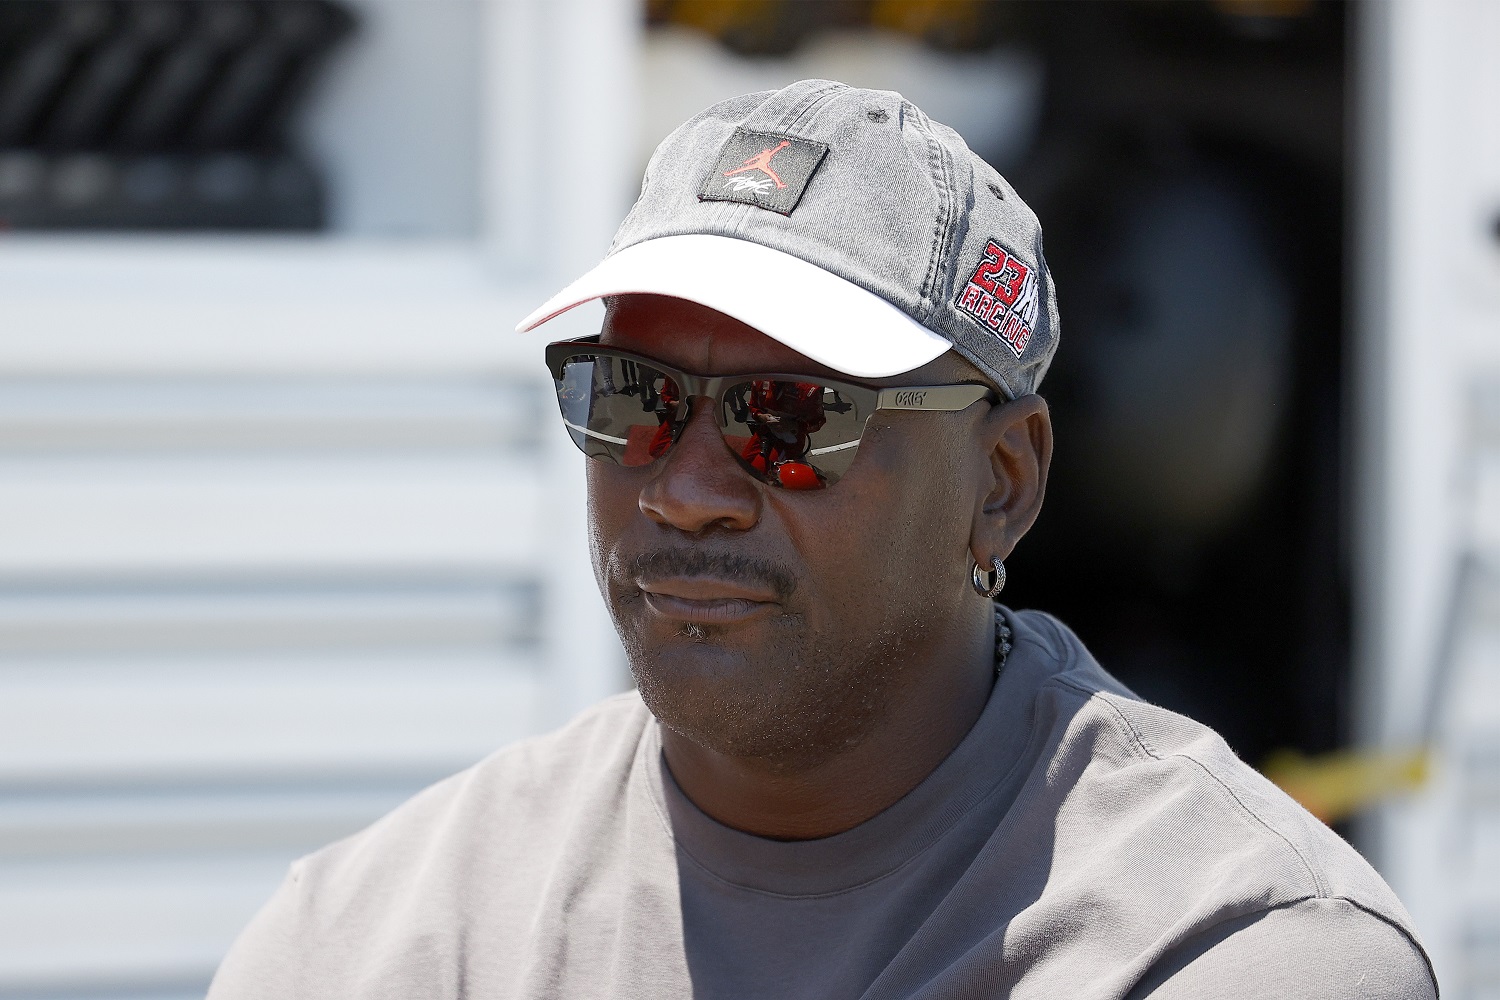 Michael Jordan's 23XI Racing could operate a second NASCAR Cup Series team in 2022, but the process would work better is he could buy or lease a suddenly scarce charter for it. | Maddie Meyer/Getty Images